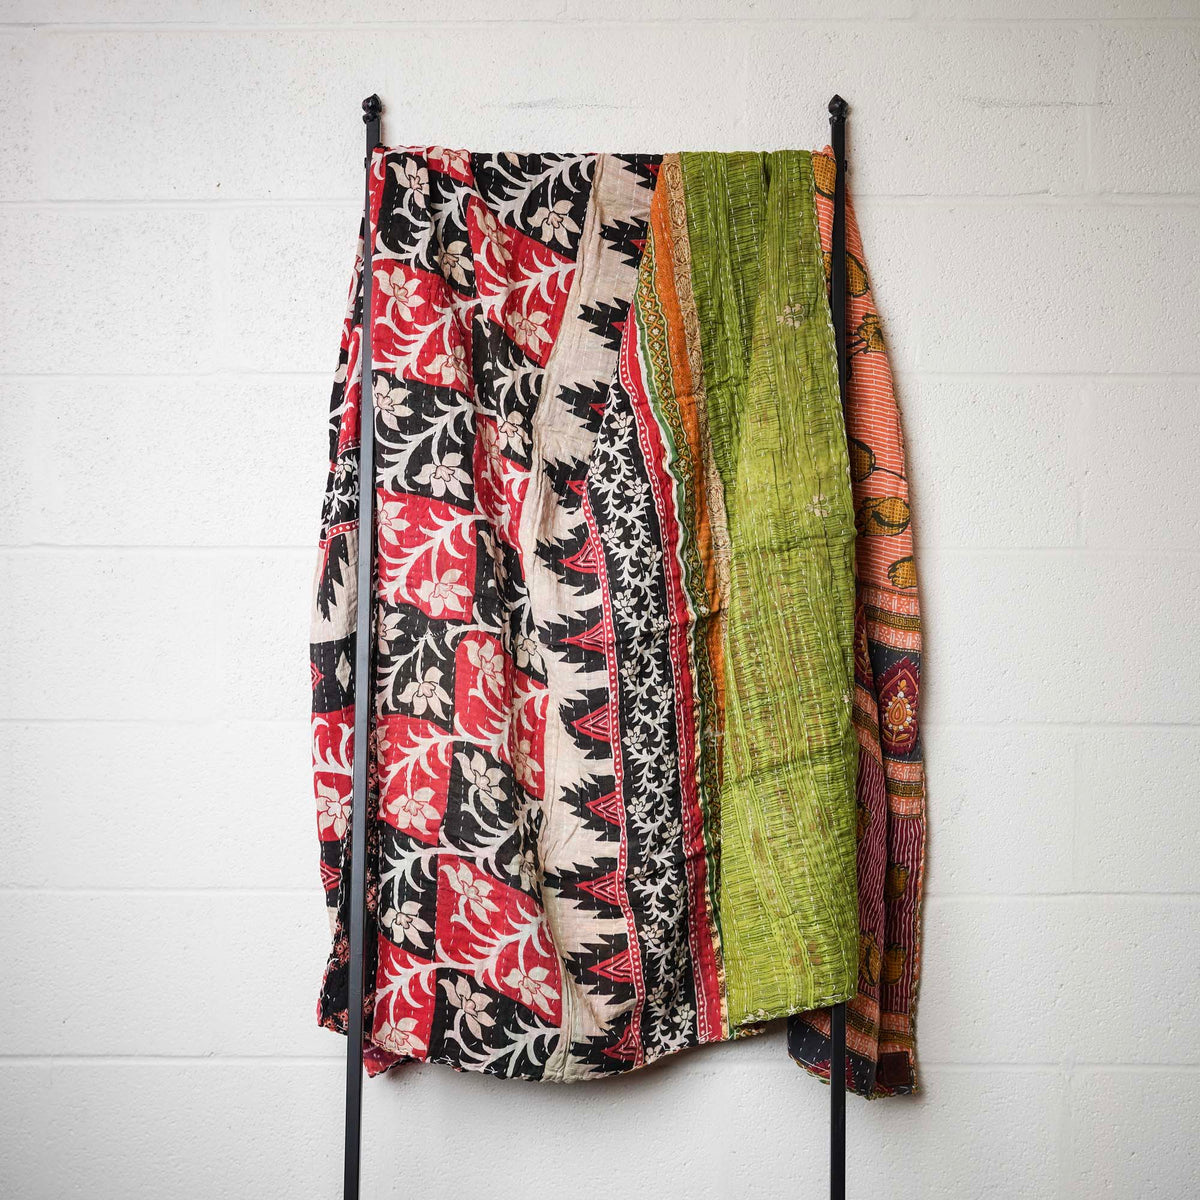 Kantha India Blanket One-of-a-Kind Handcrafted Quilted Pattern Throw ~ No. K-00570